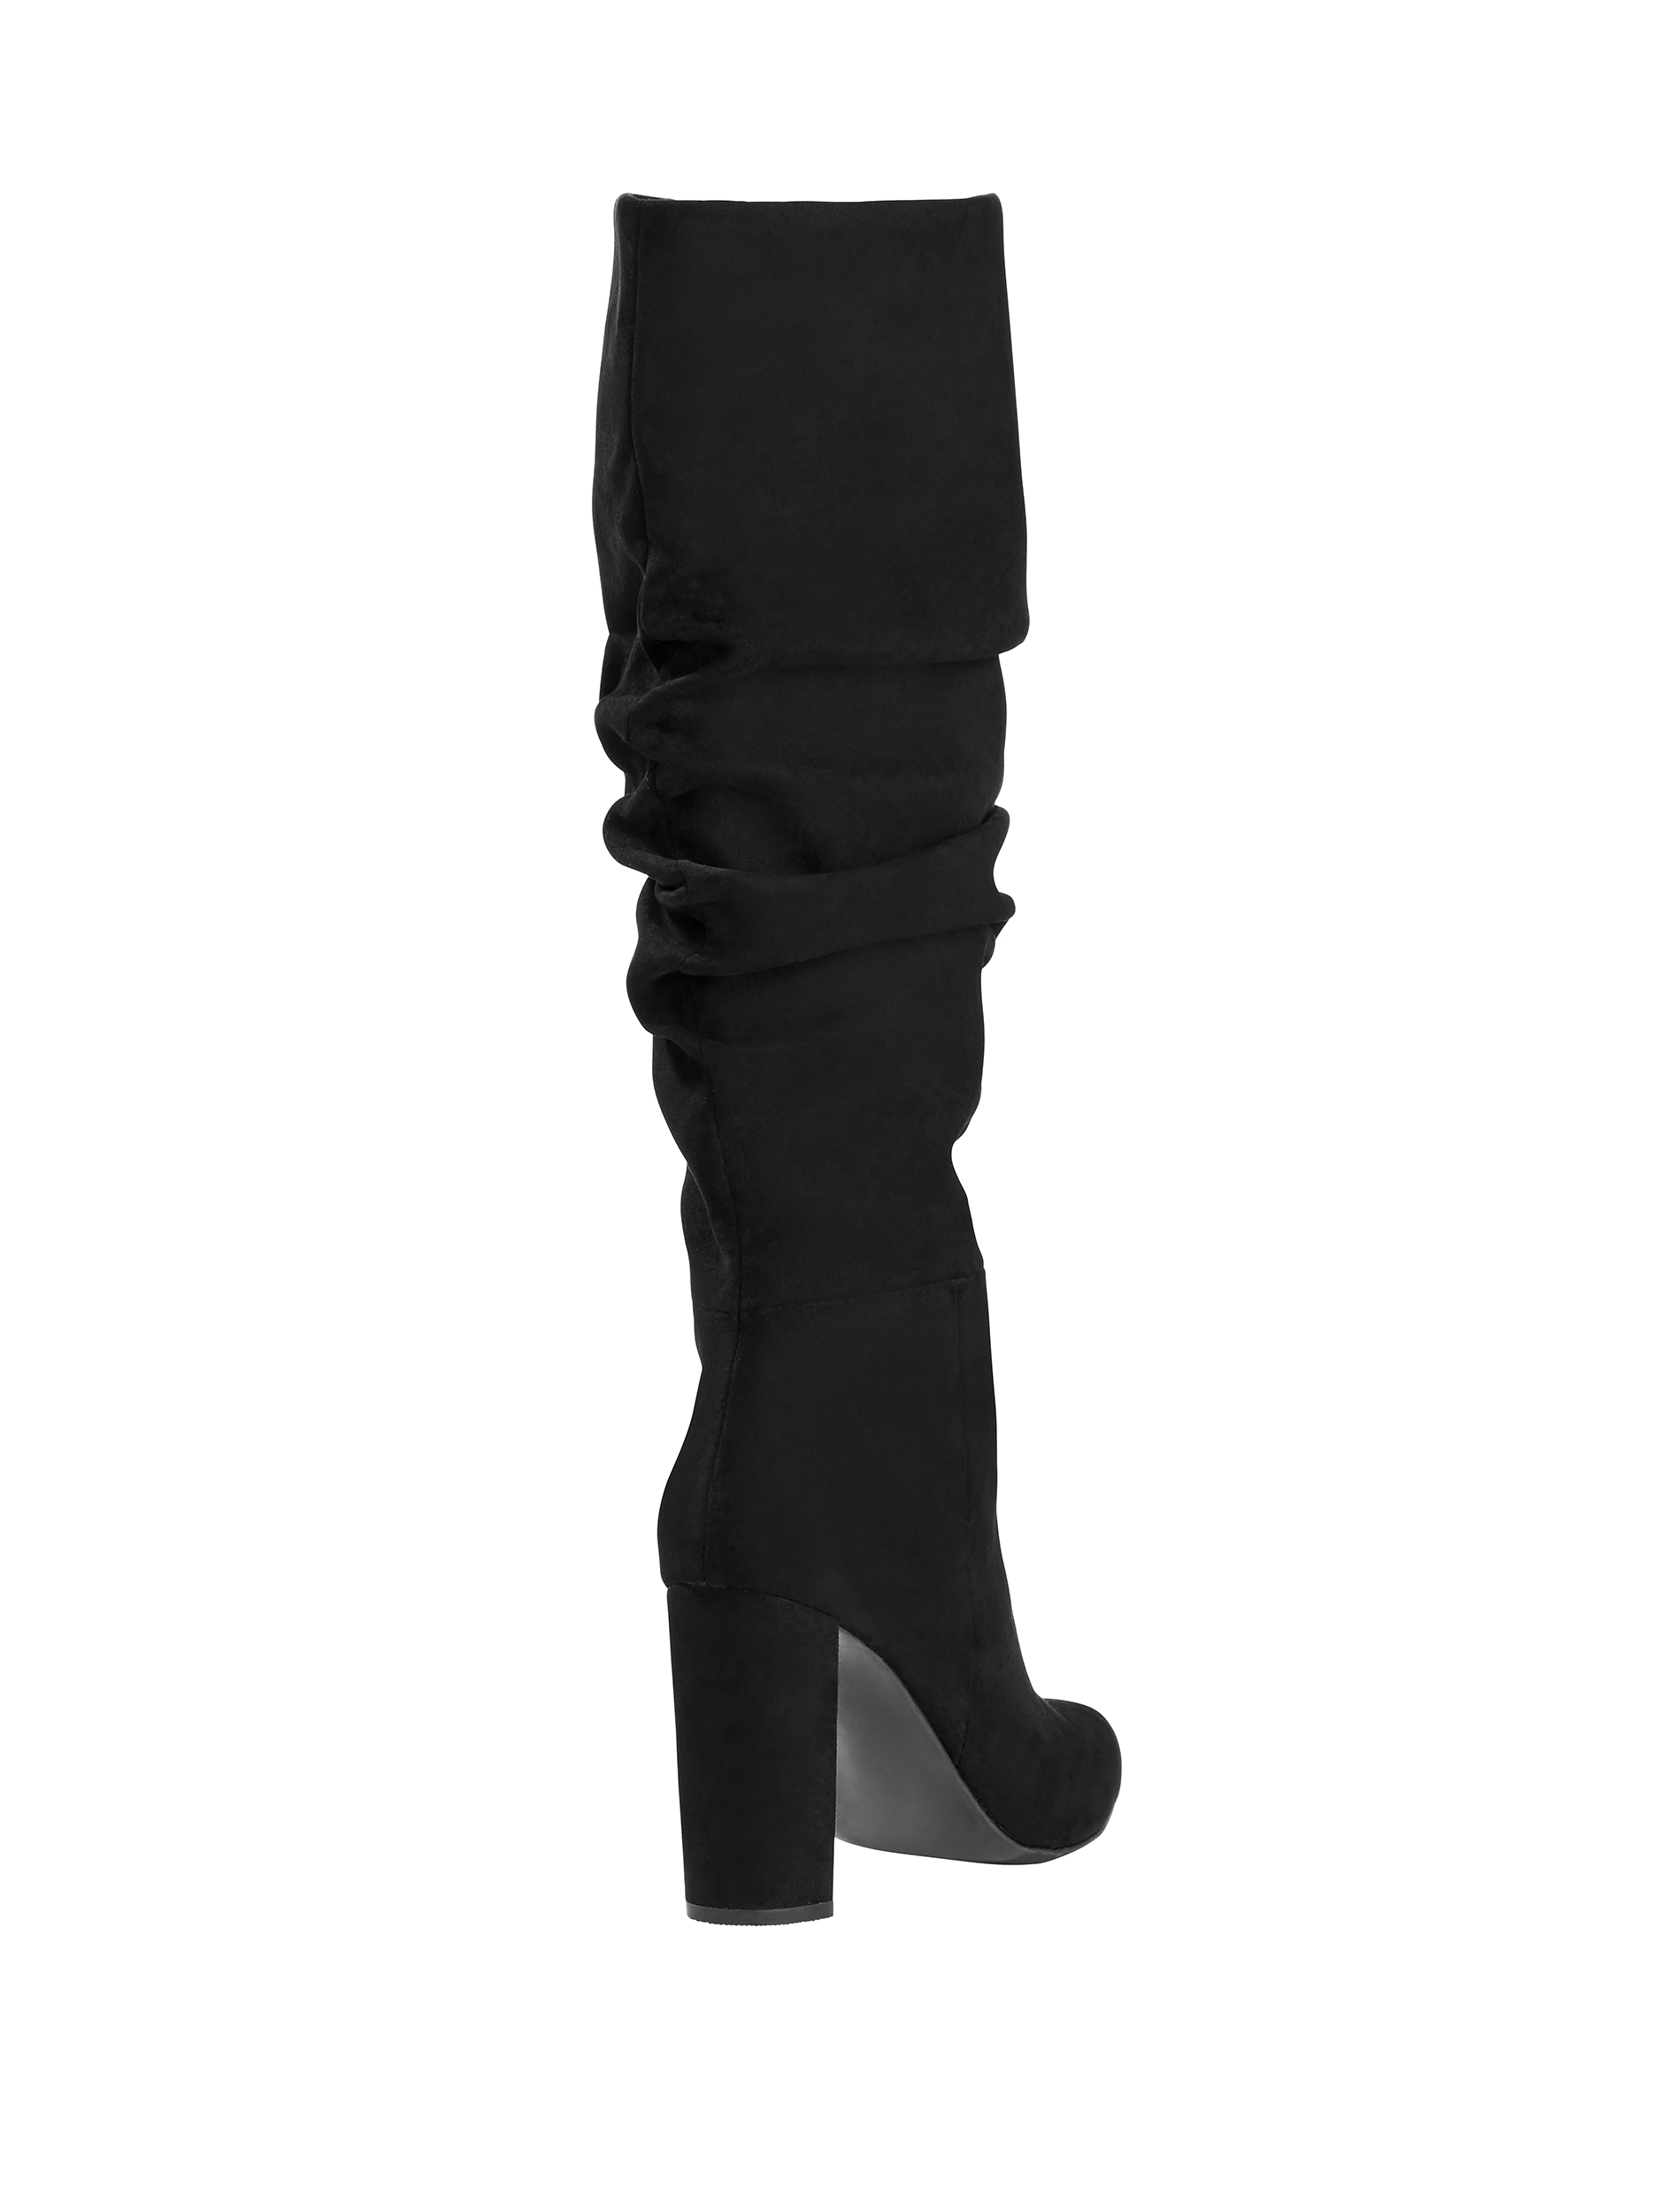 Scoop Women’s Penny Microsuede Slouch Boots - image 3 of 6